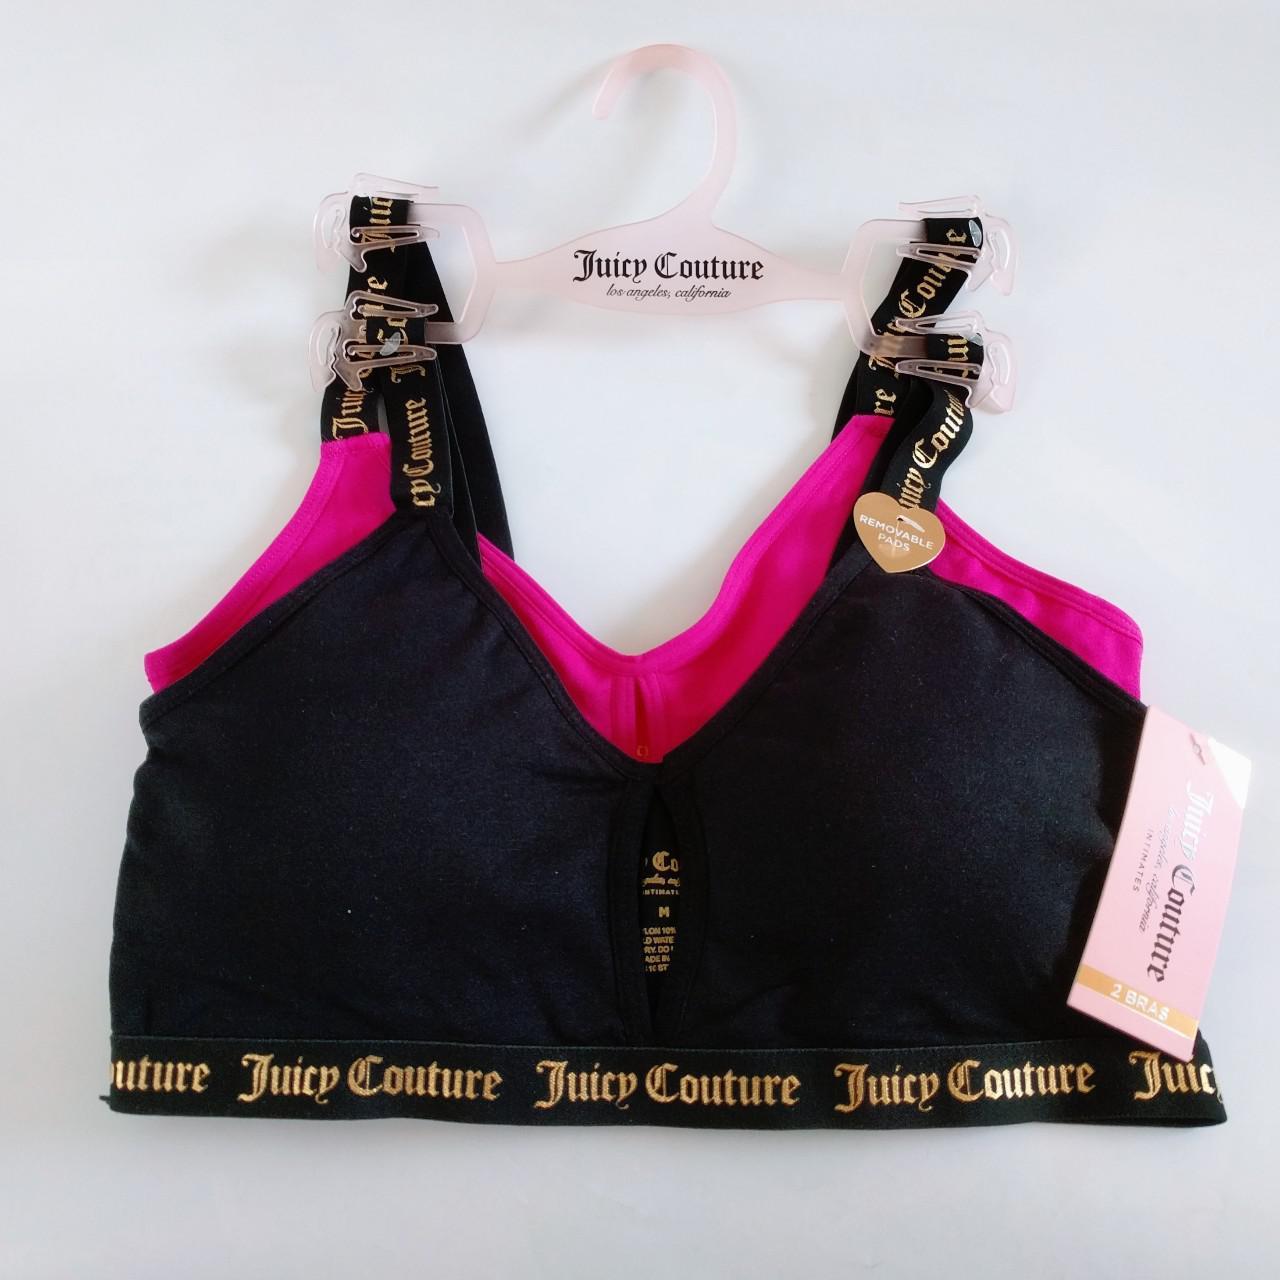 Juicy Couture, Intimates & Sleepwear, Juicy Couture Sports Bra